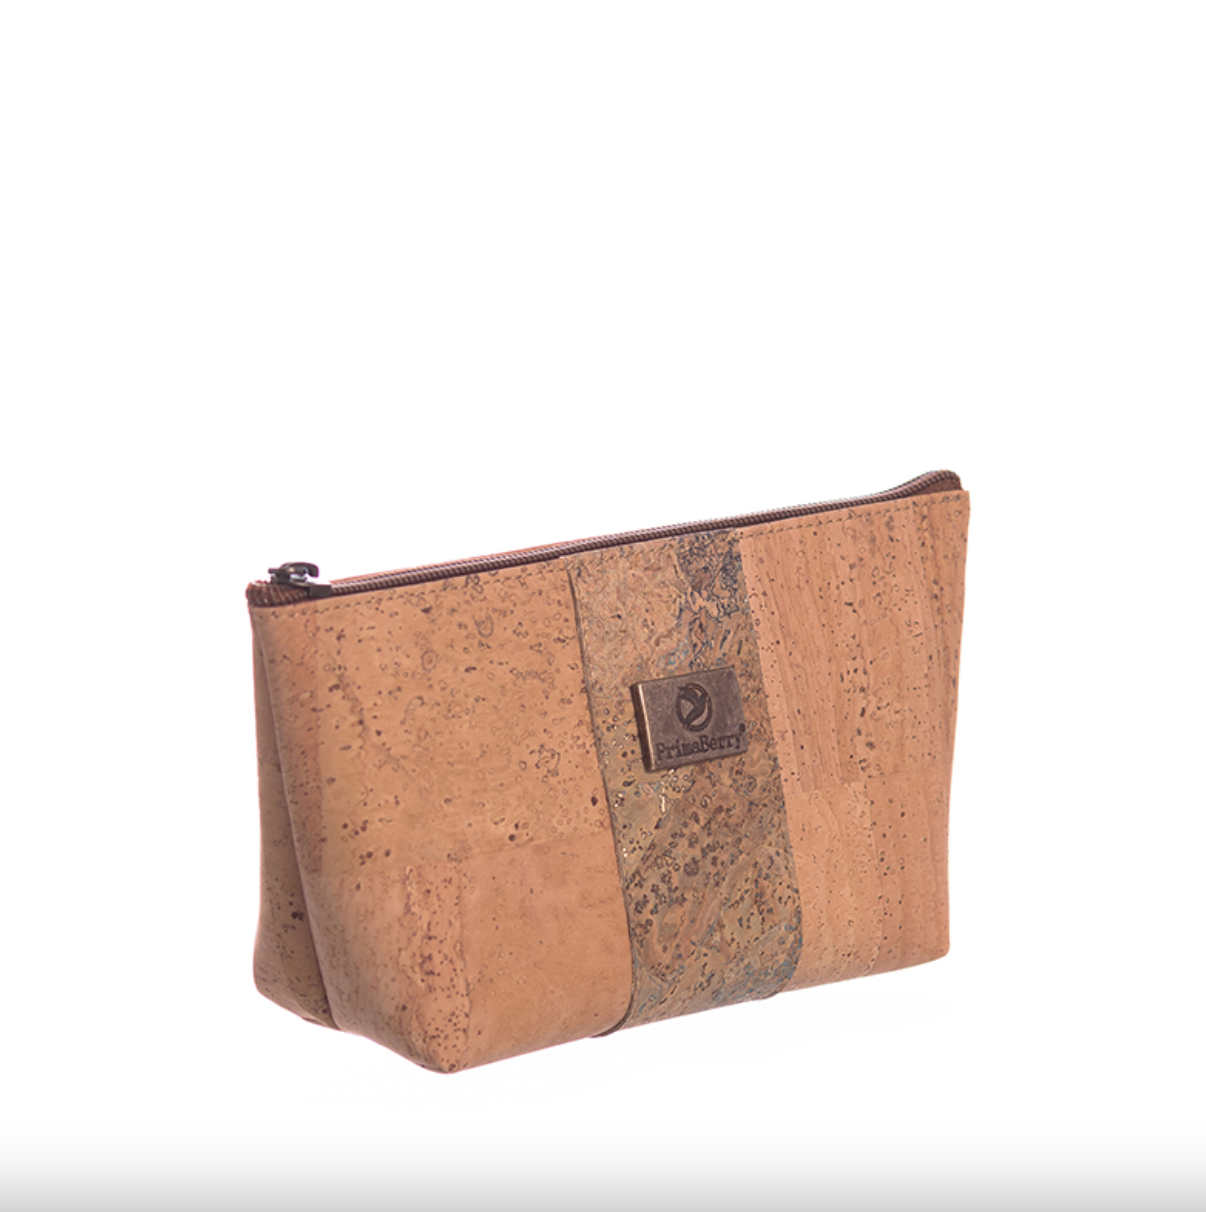 Small Map Cosmetic Bag: Stylish and Functional Travel Bag with a Vintage Map Design, Made from Sustainable Cork